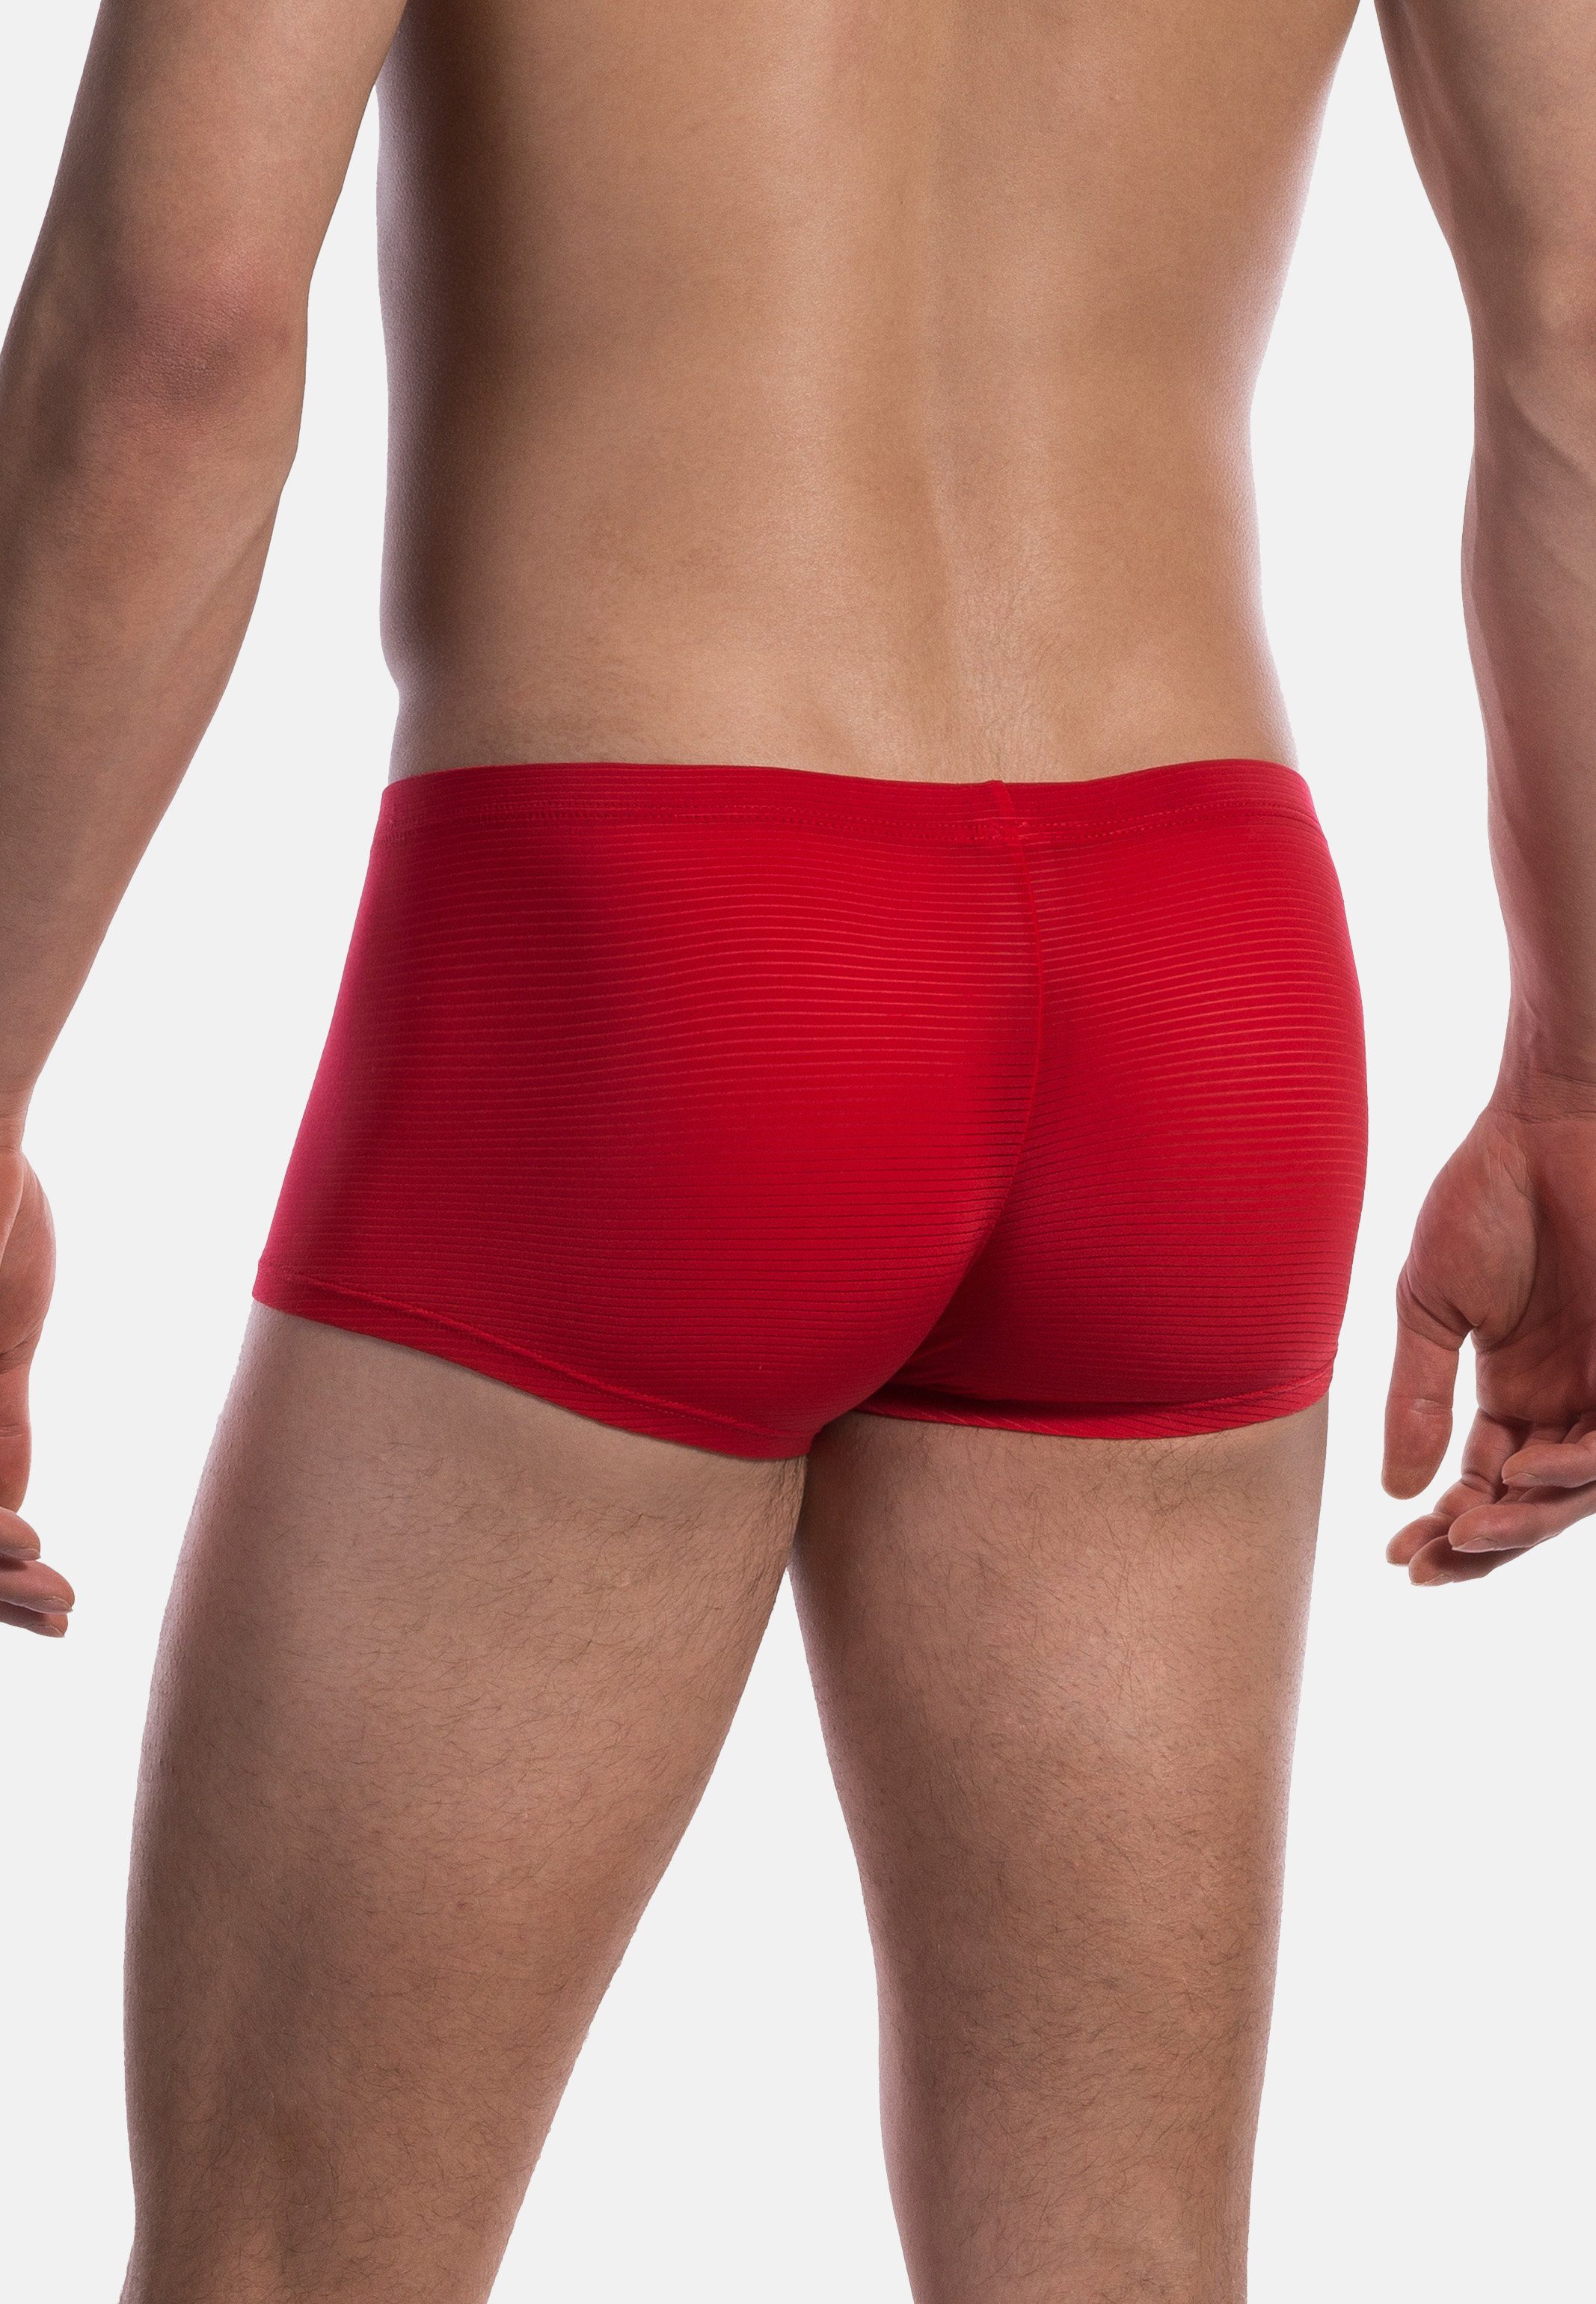 Olaf Benz Pant Eingriff - / Rot Mikrofaser Retro (1-St) Boxer Ohne Hipster Luftige RED1201 Minipants 